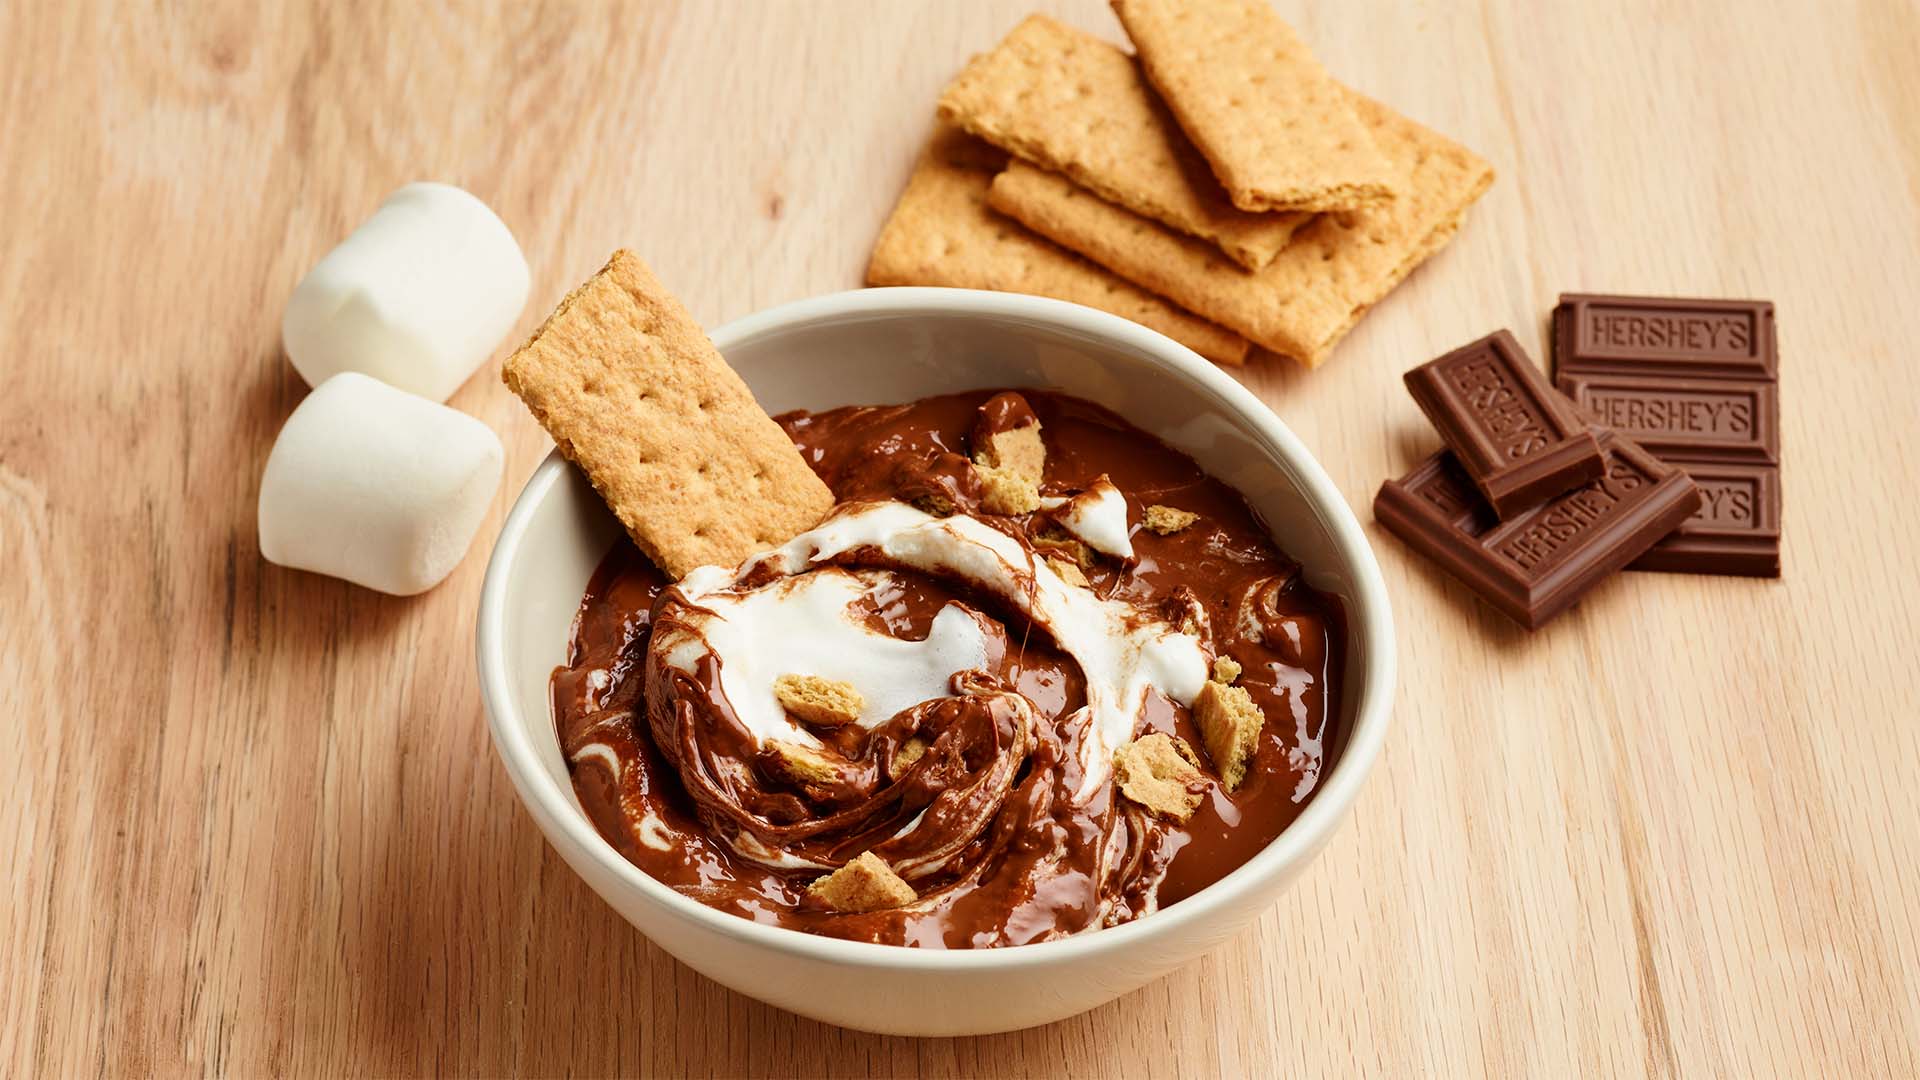 hersheys smores in a cup